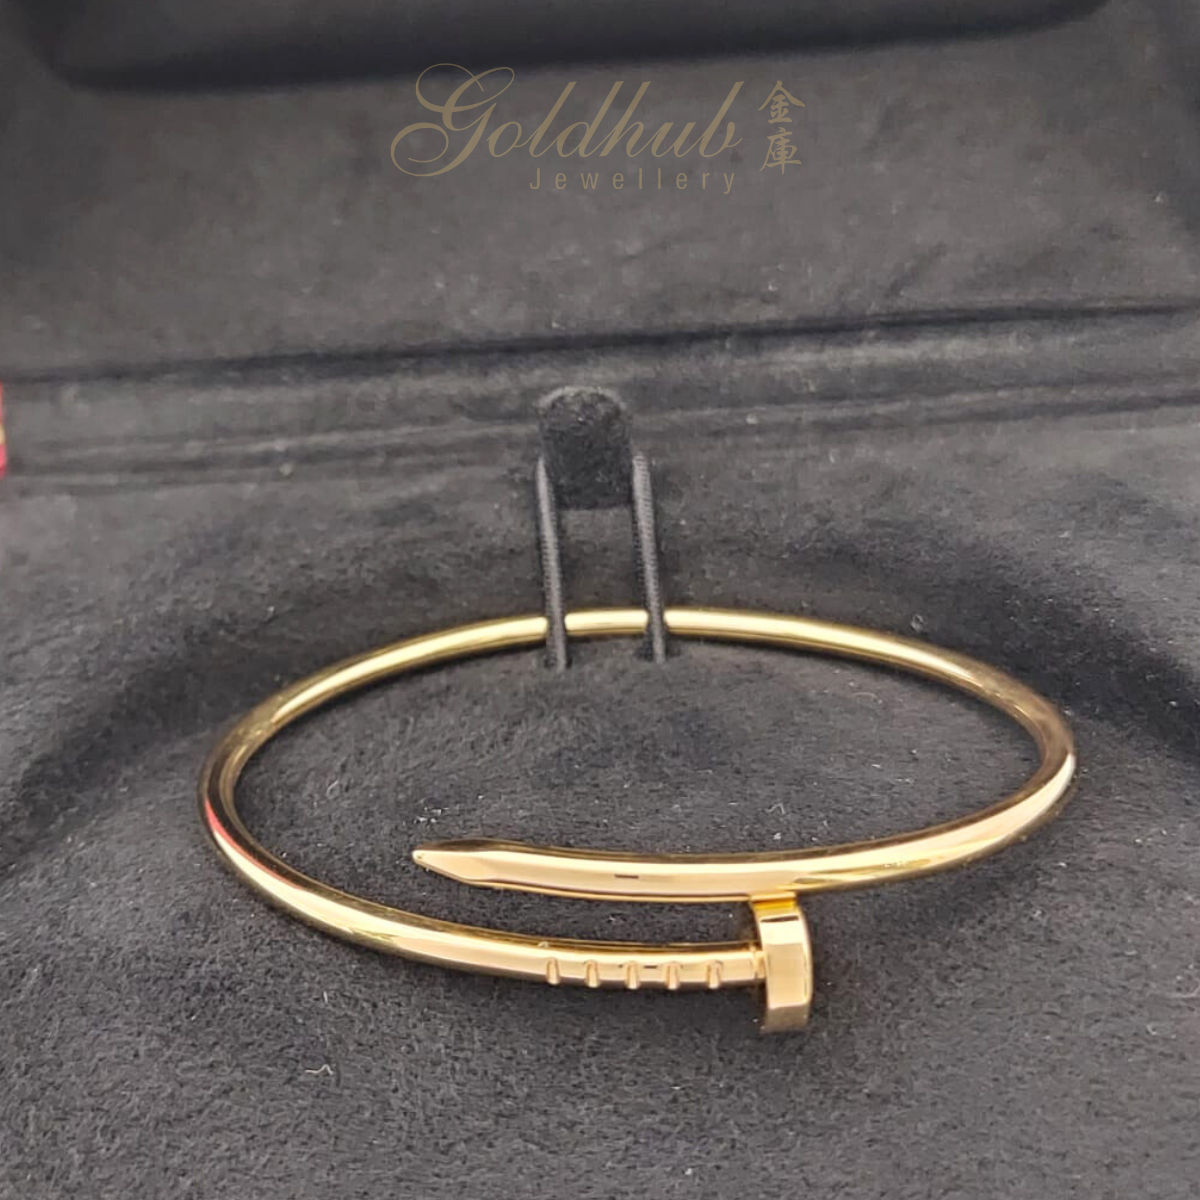 18k Pre-loved Cartier Juste Un Clou Bracelet (Small Model) in Yellow Gold